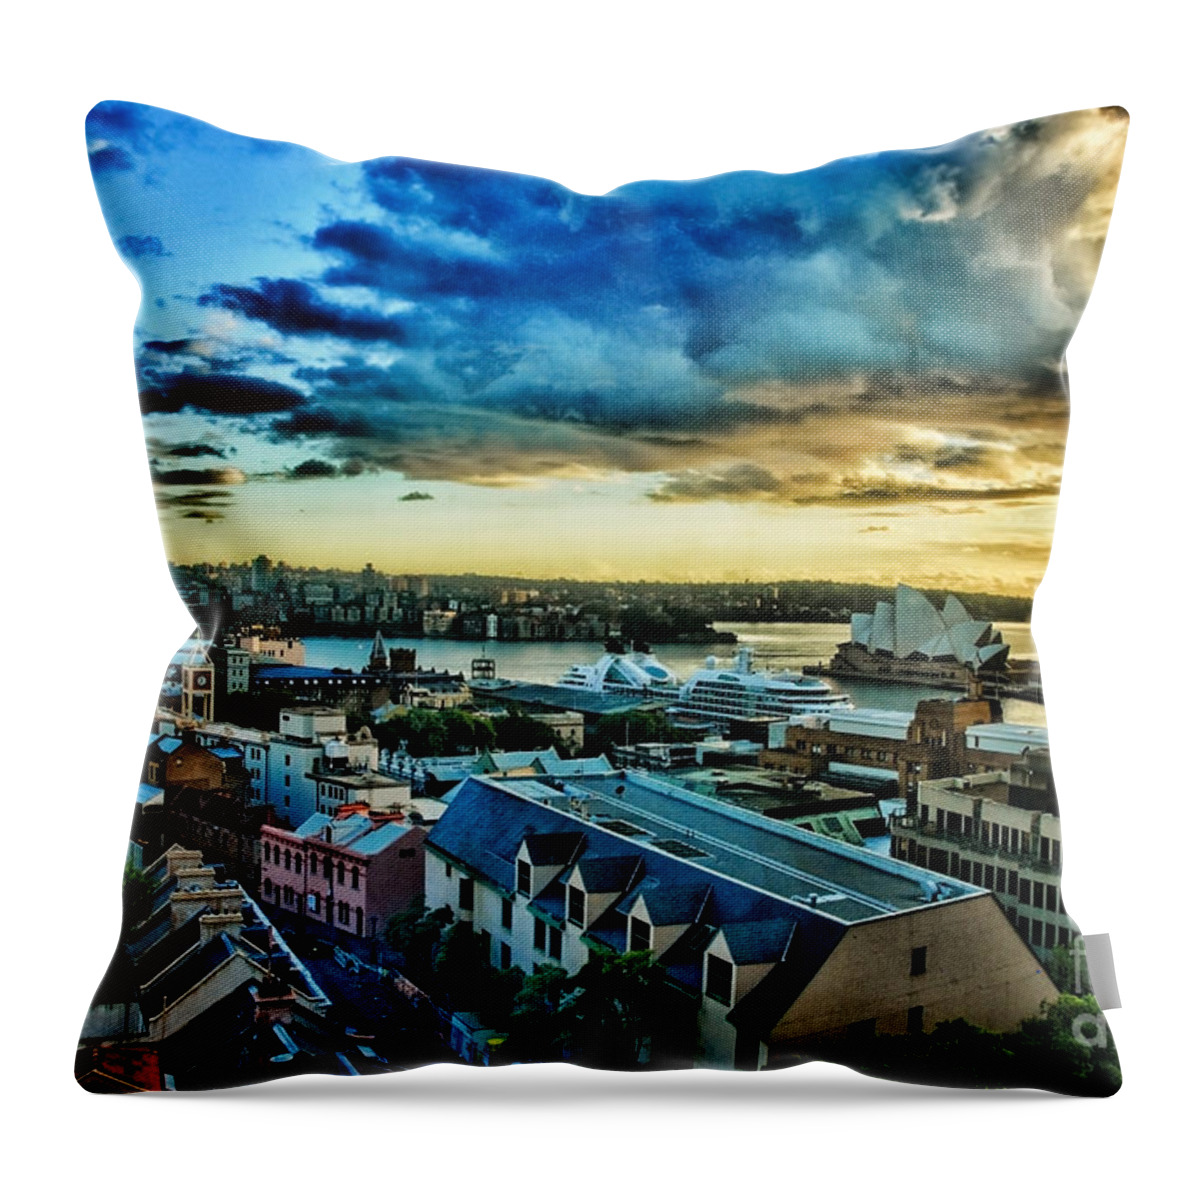 Sydney Throw Pillow featuring the photograph Sydney Harbor Sunrise by Syed Aqueel